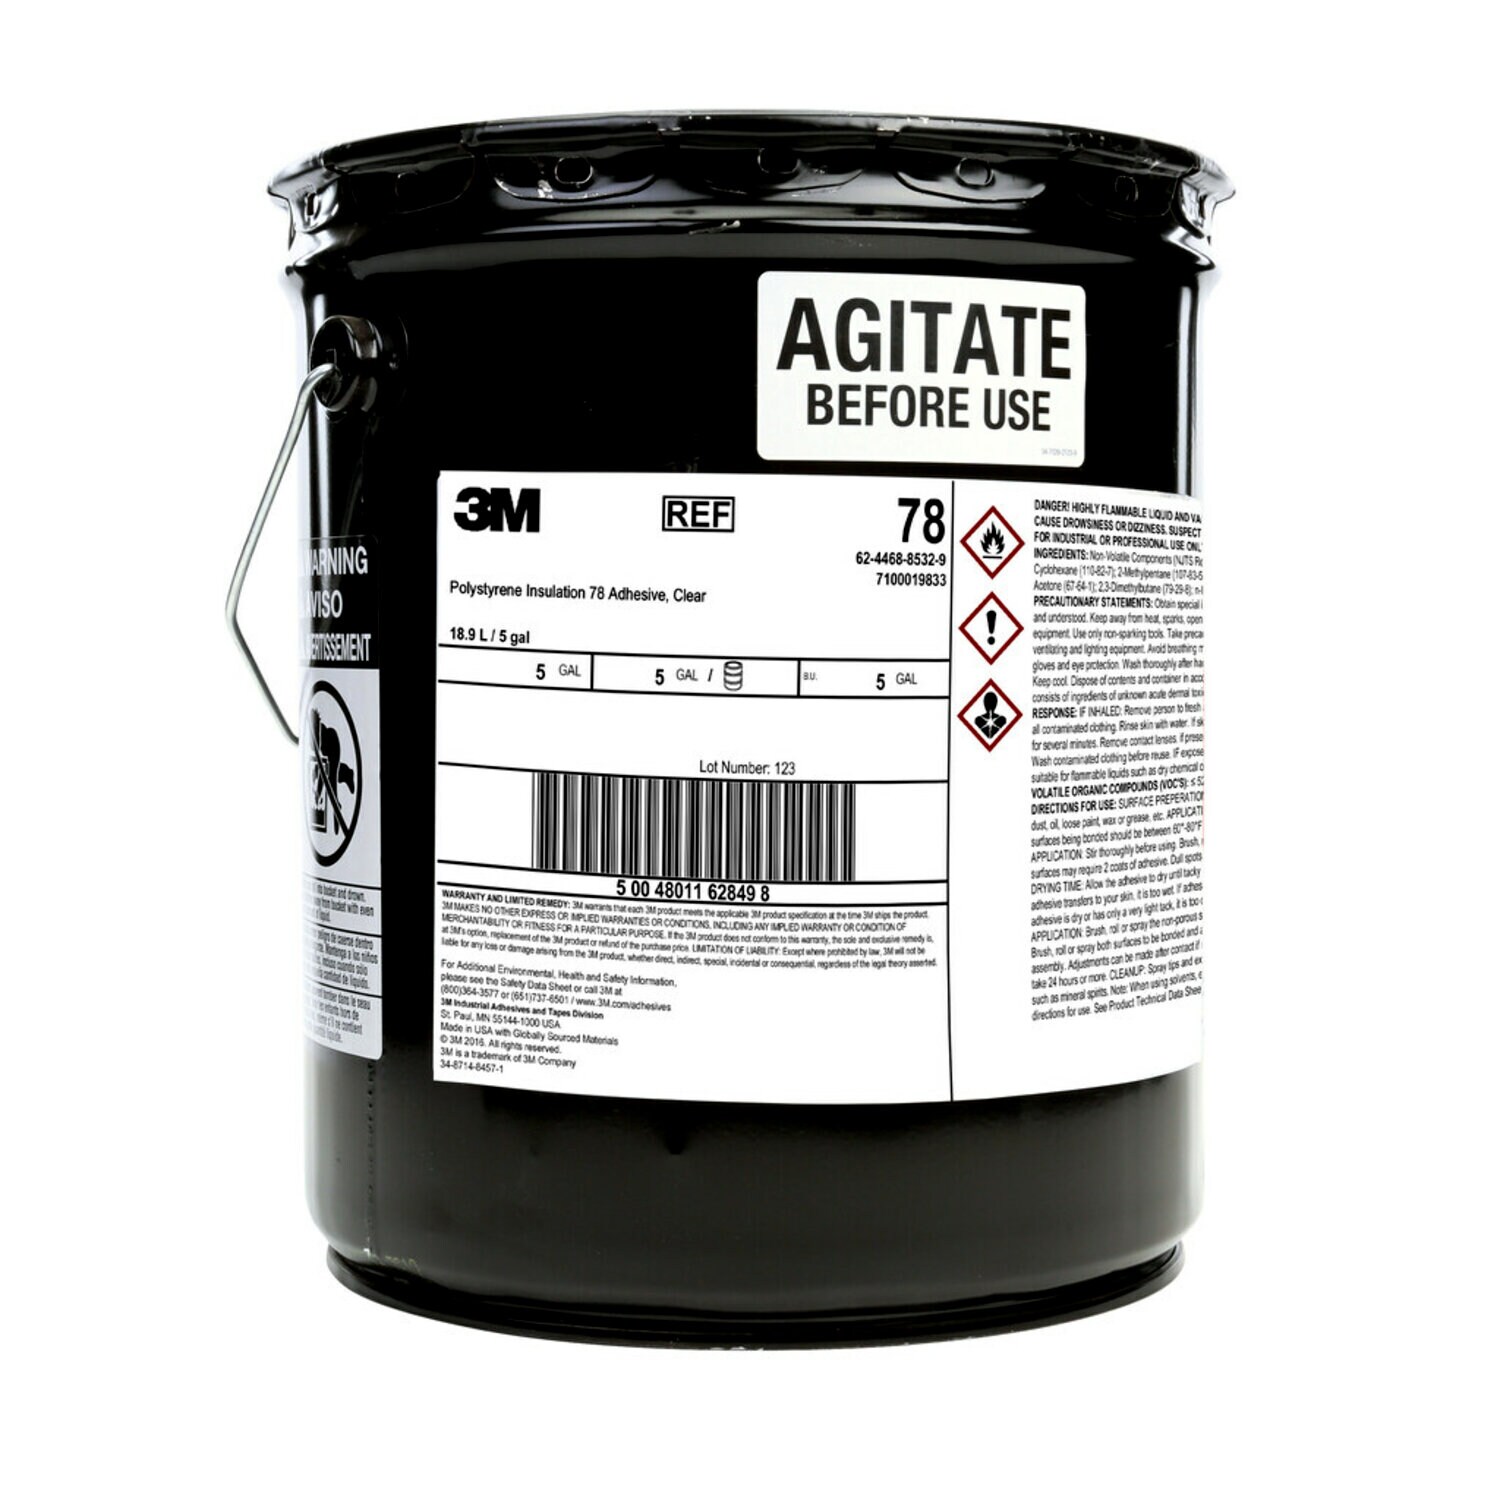 7100019833 - 3M Polystyrene Insulation Adhesive 78, Clear, 5 Gallon Drum (Pail)